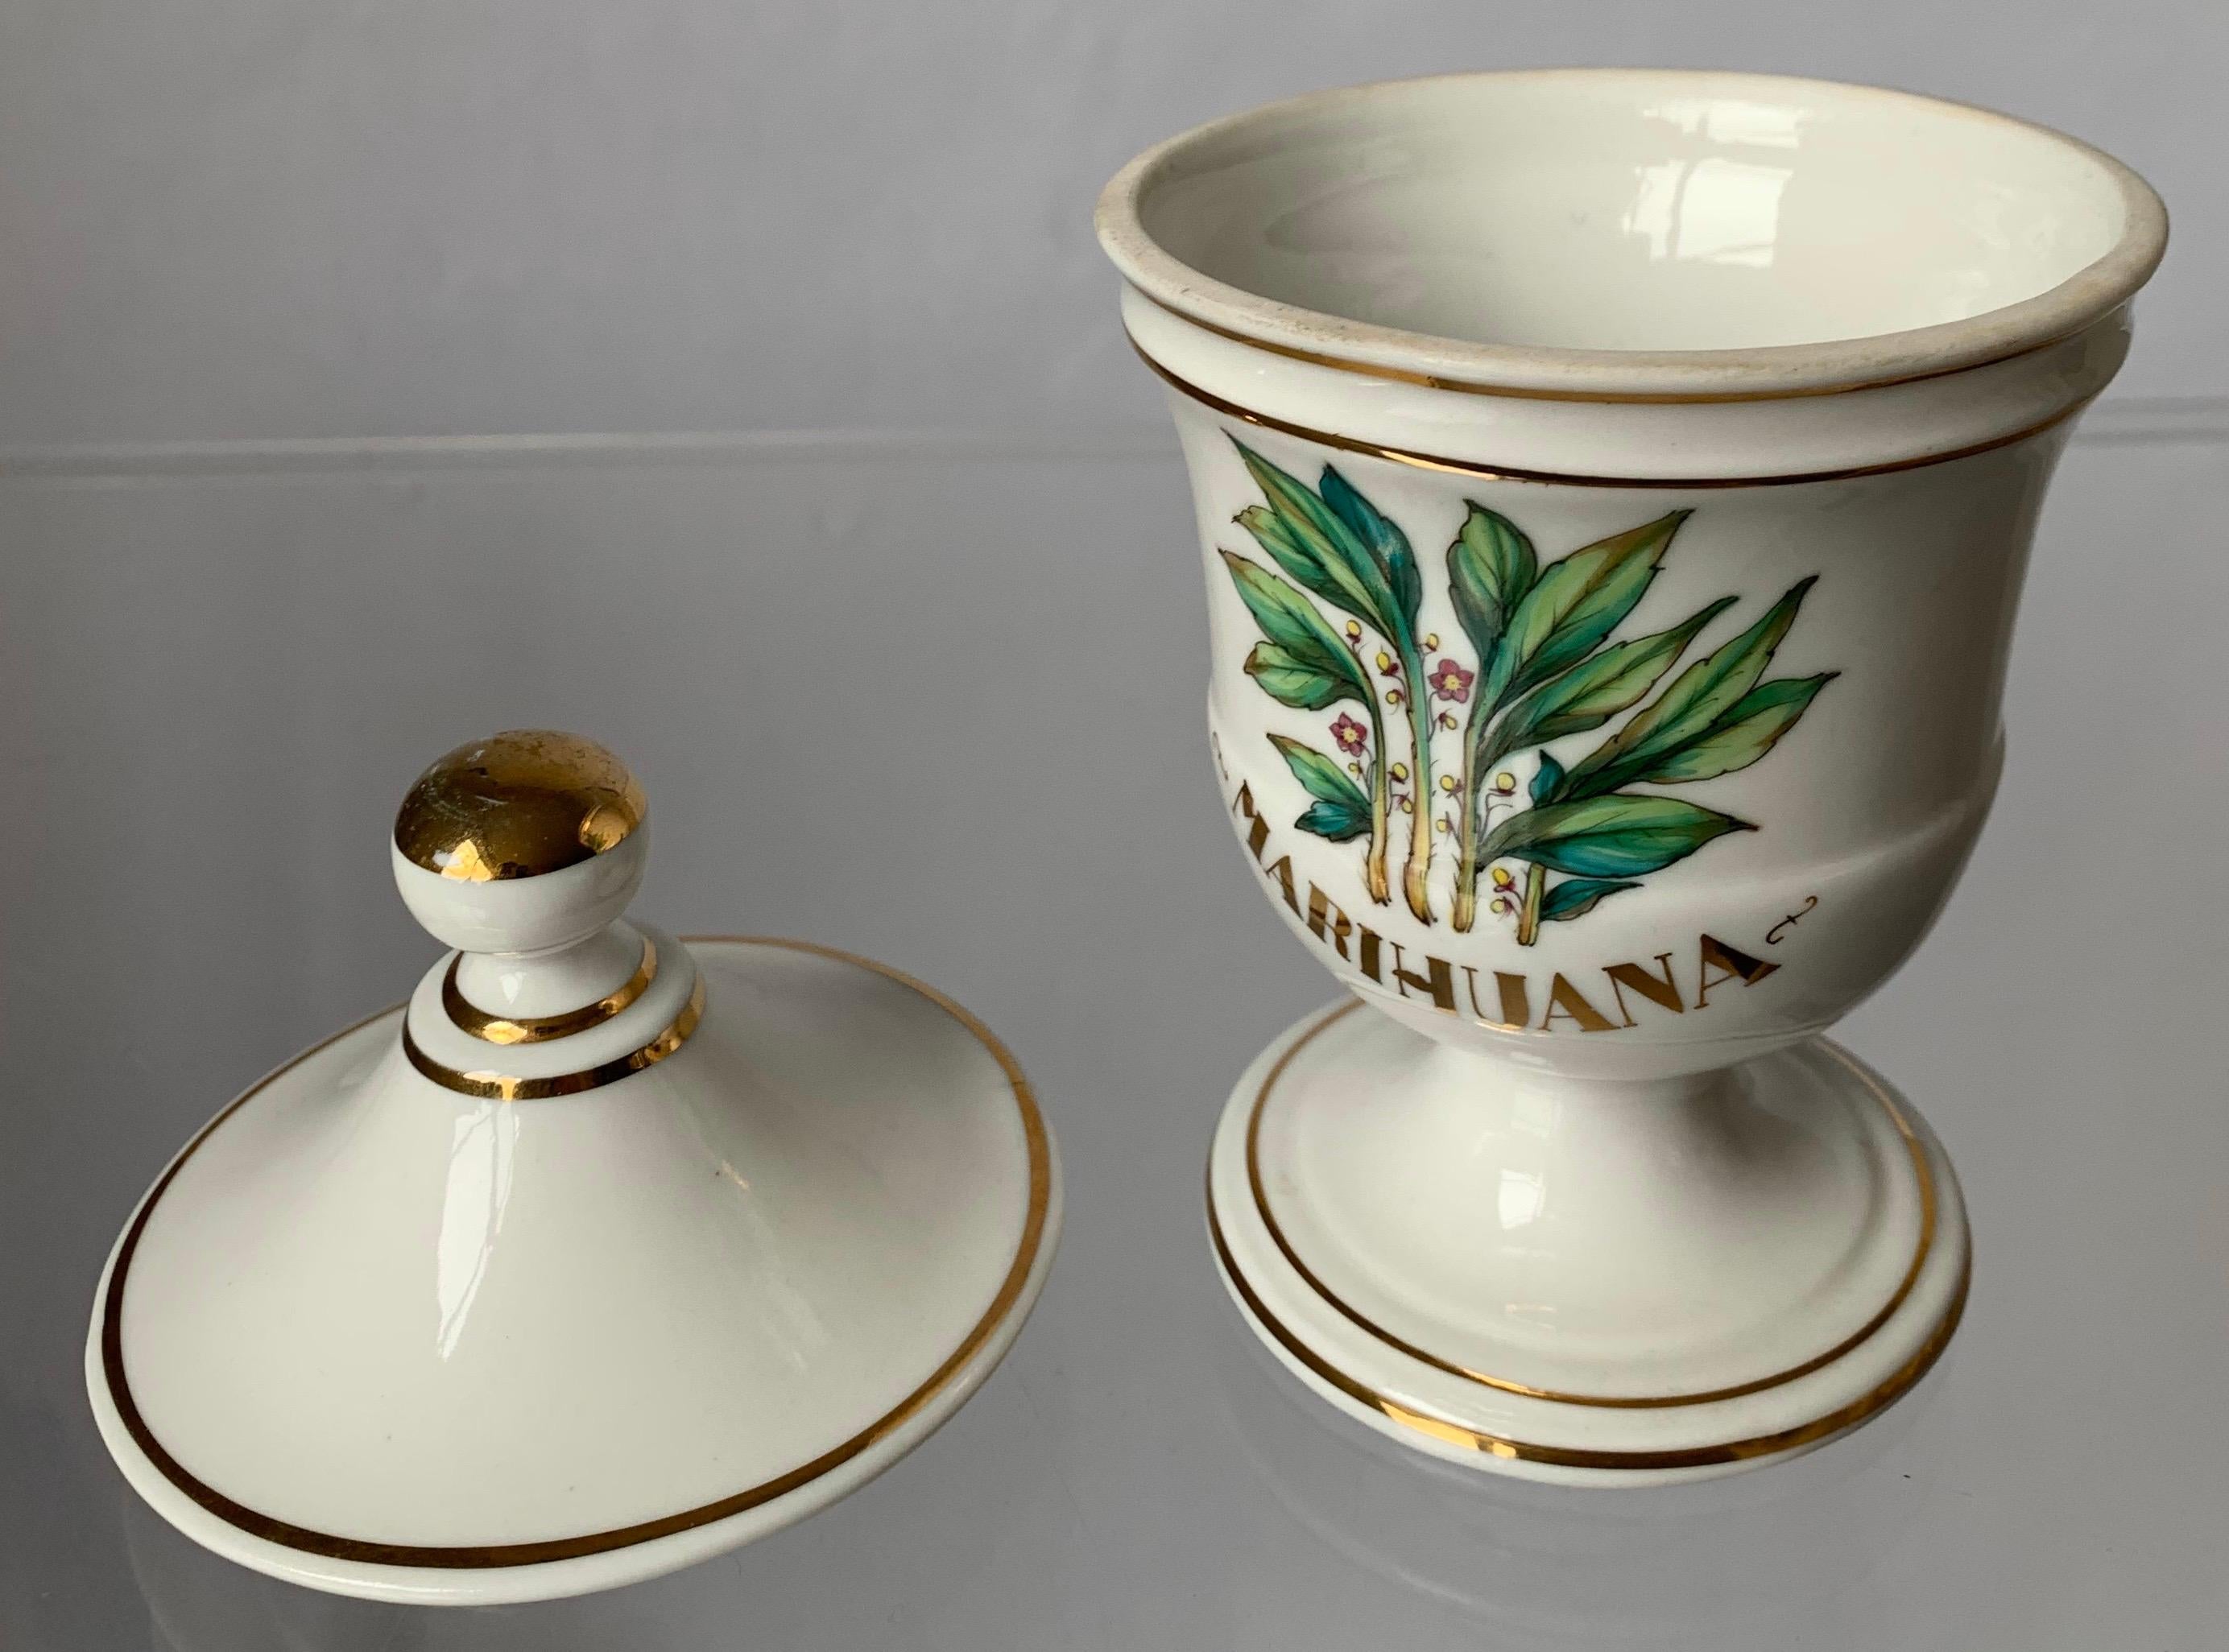 20th Century Limoges Marihuana Gold Rimmed Apothecary Jar